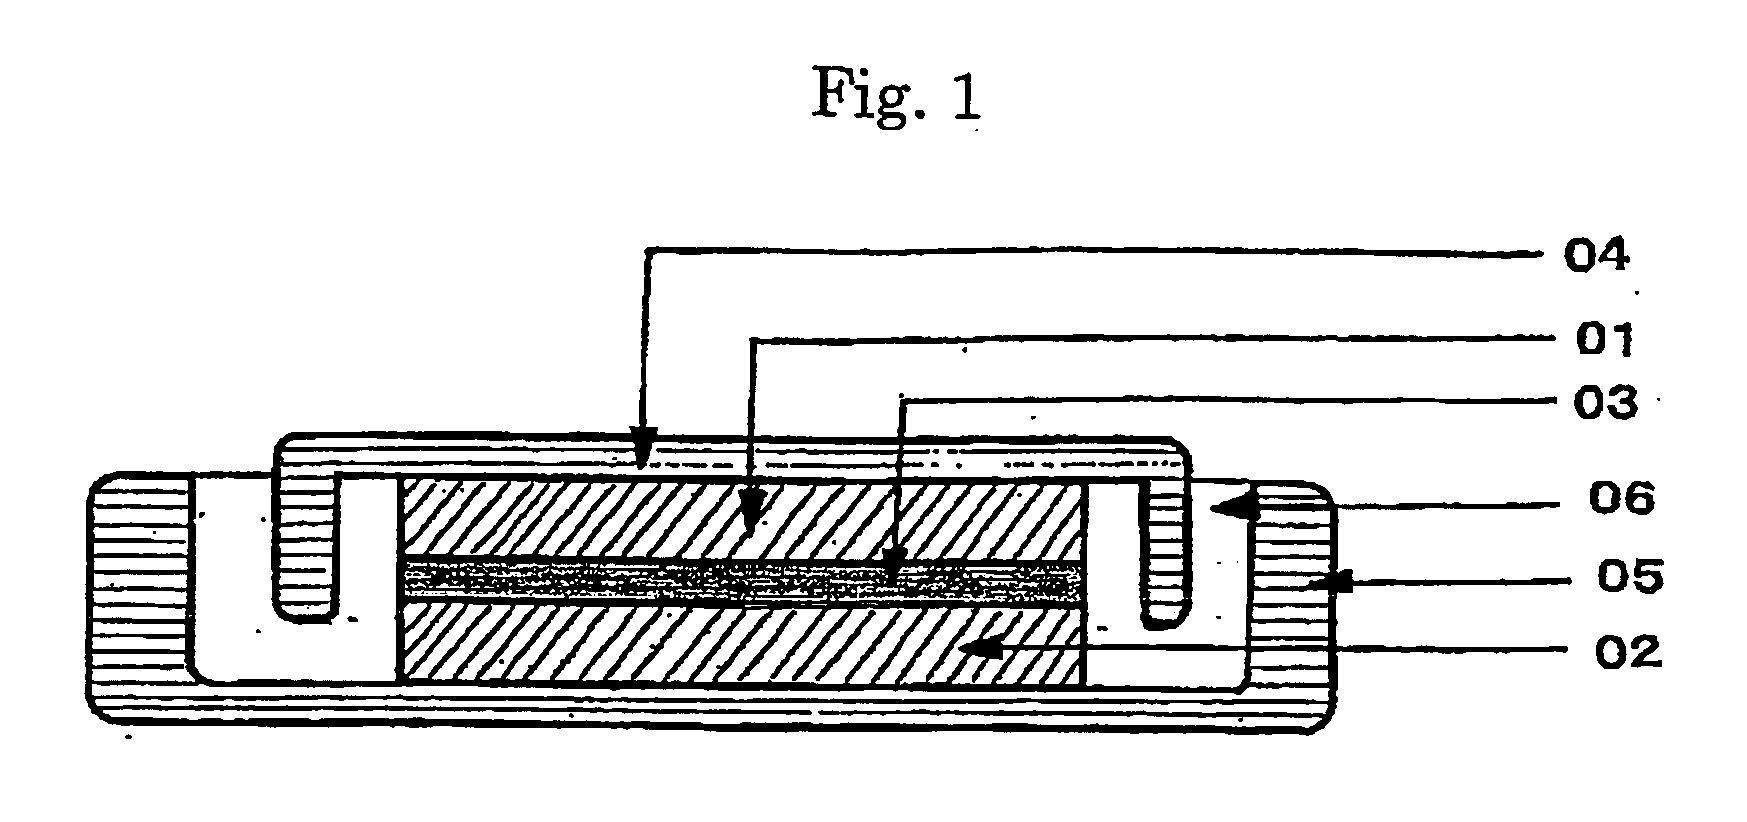 Electrode composite body, electrolyte, and redox capacitor